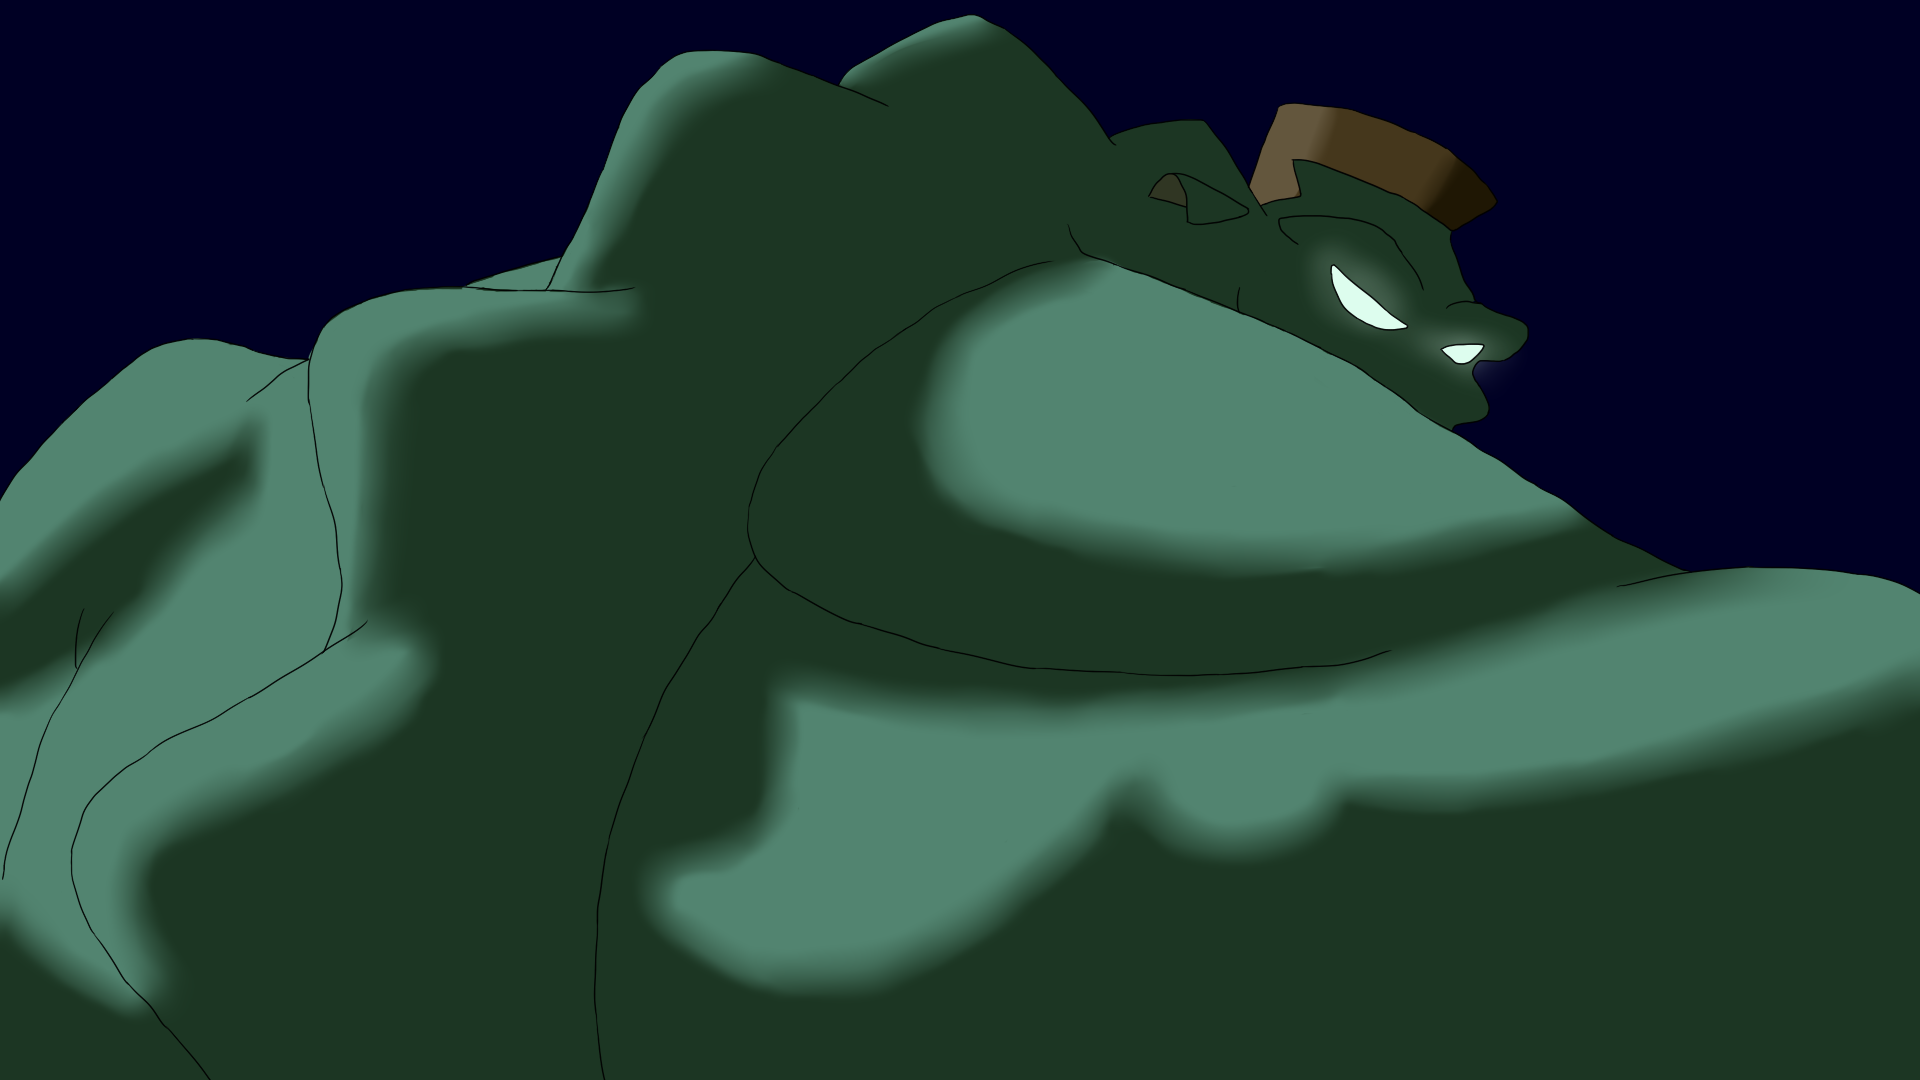 Based on screenshot from the movie Space Jam.

Traced and colored in Paint Tool SAI. 
